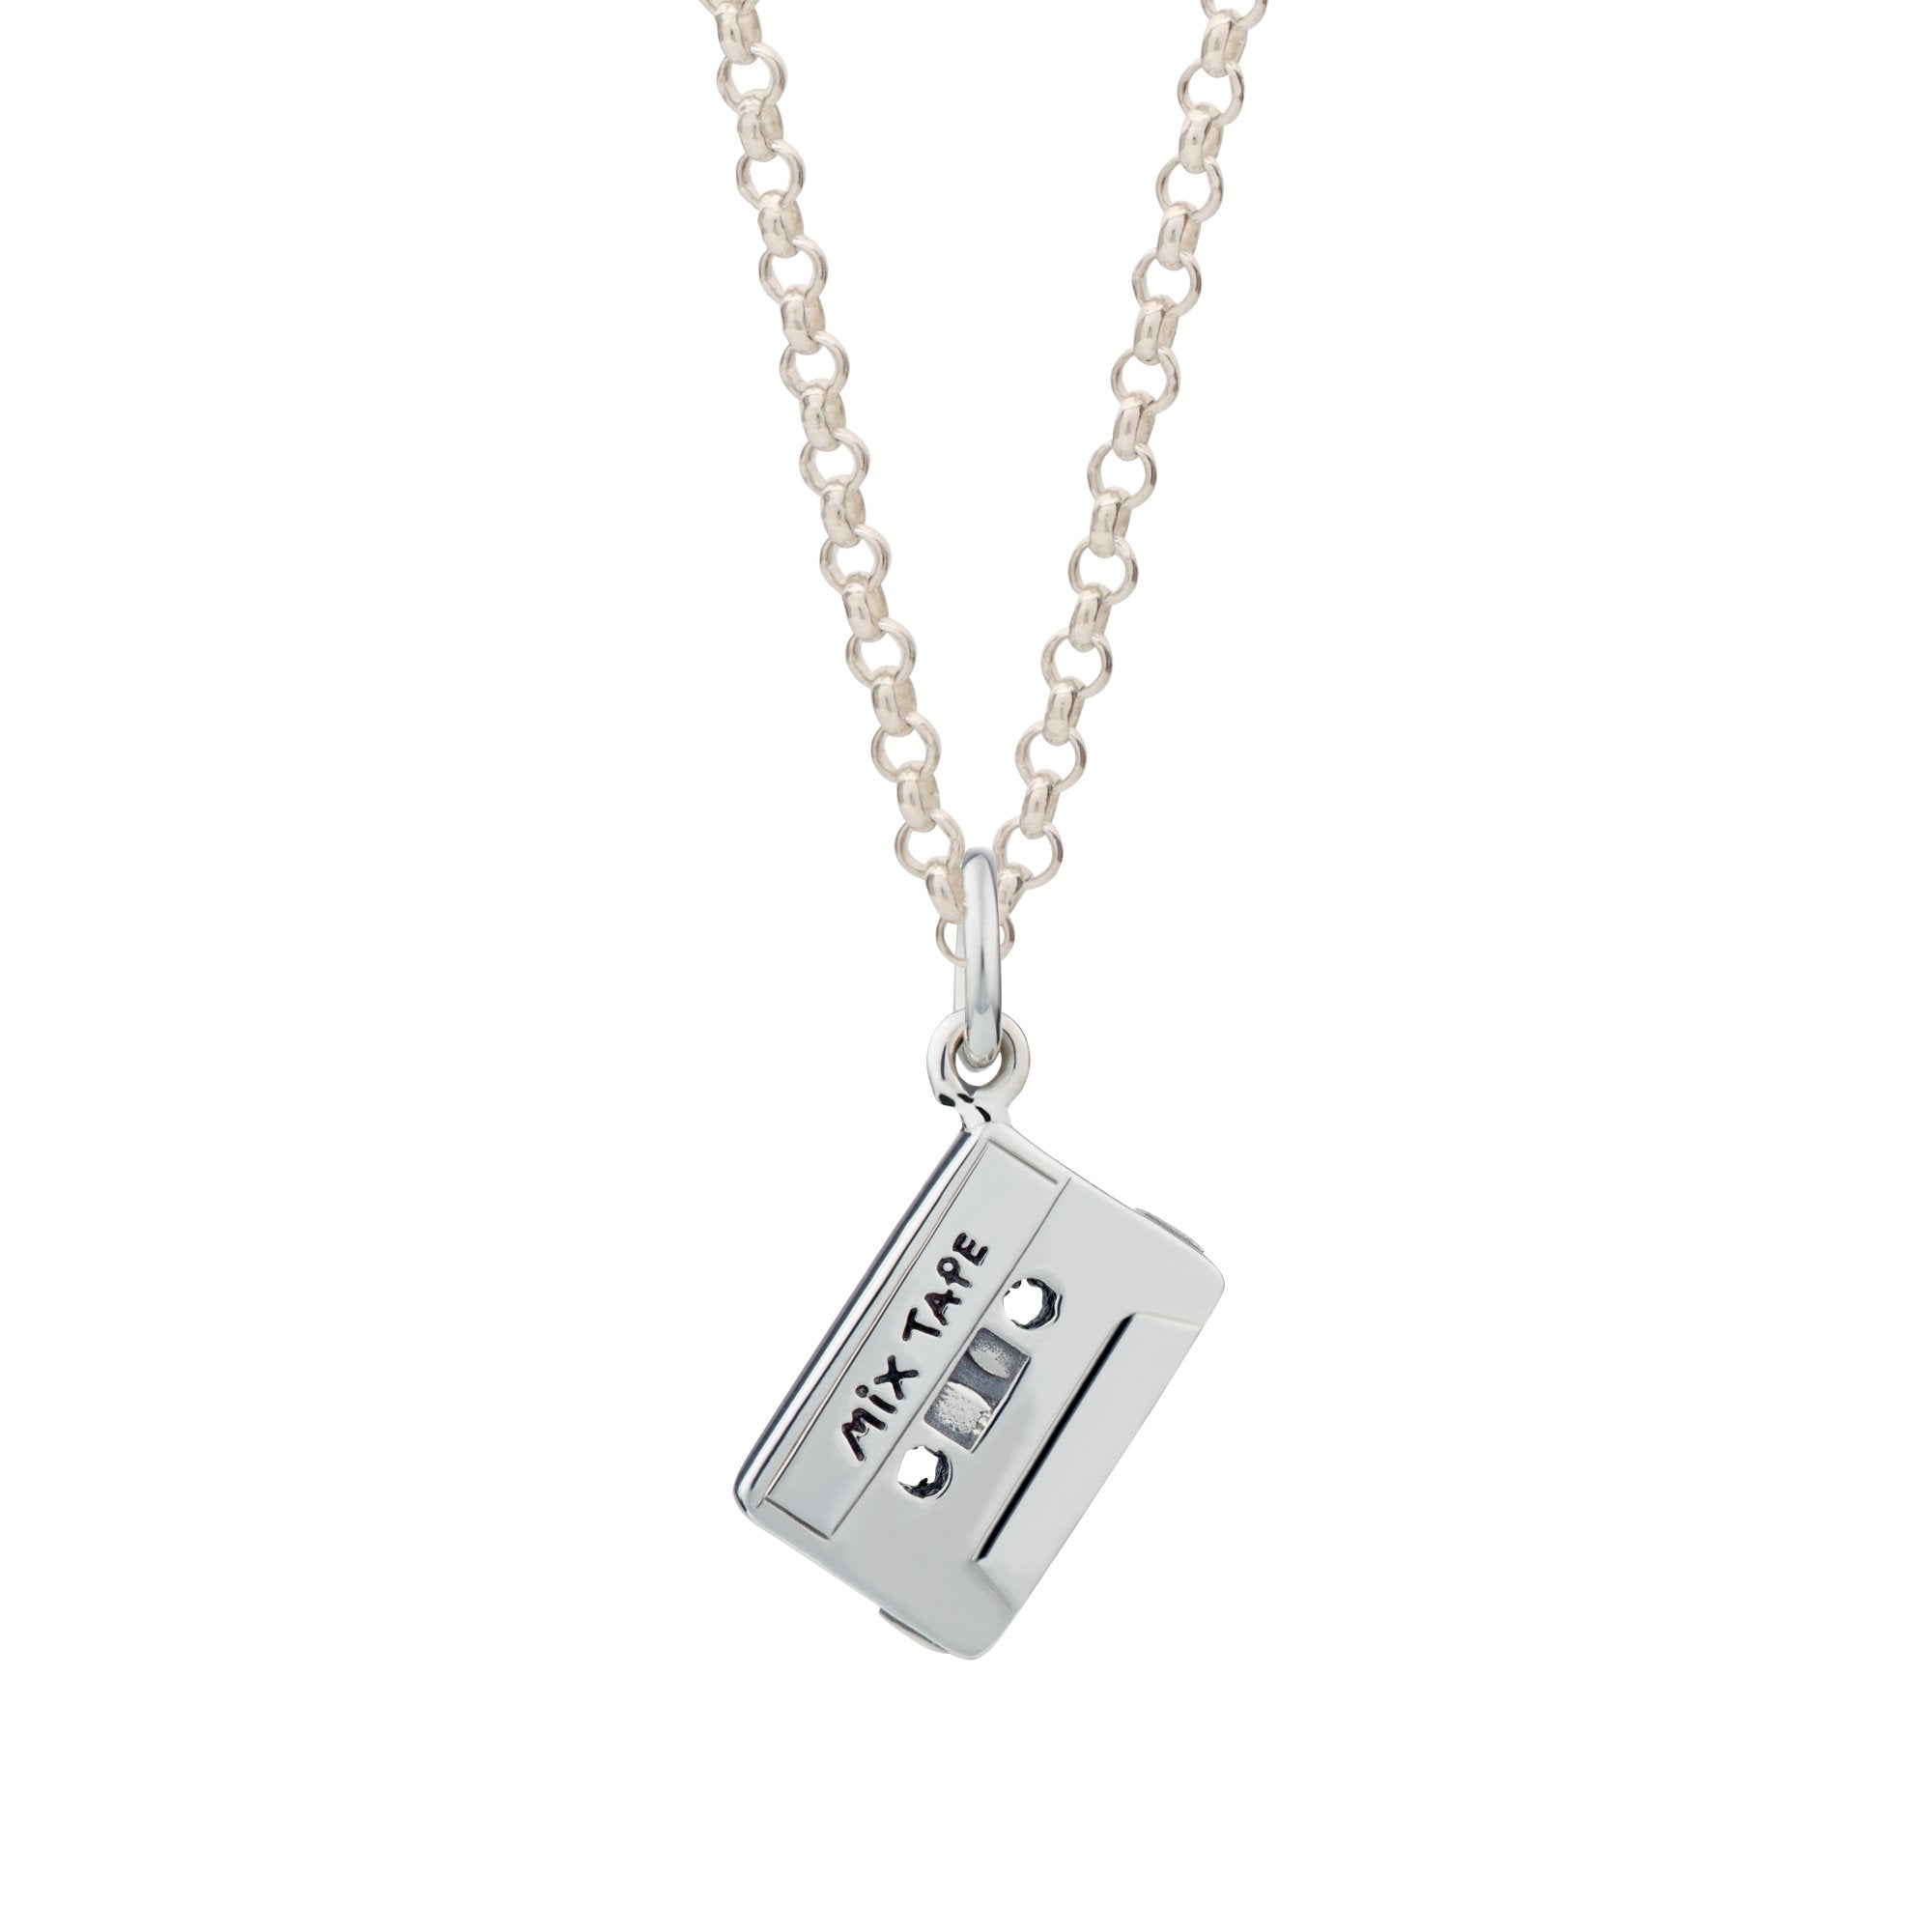 Mix Tape Necklace